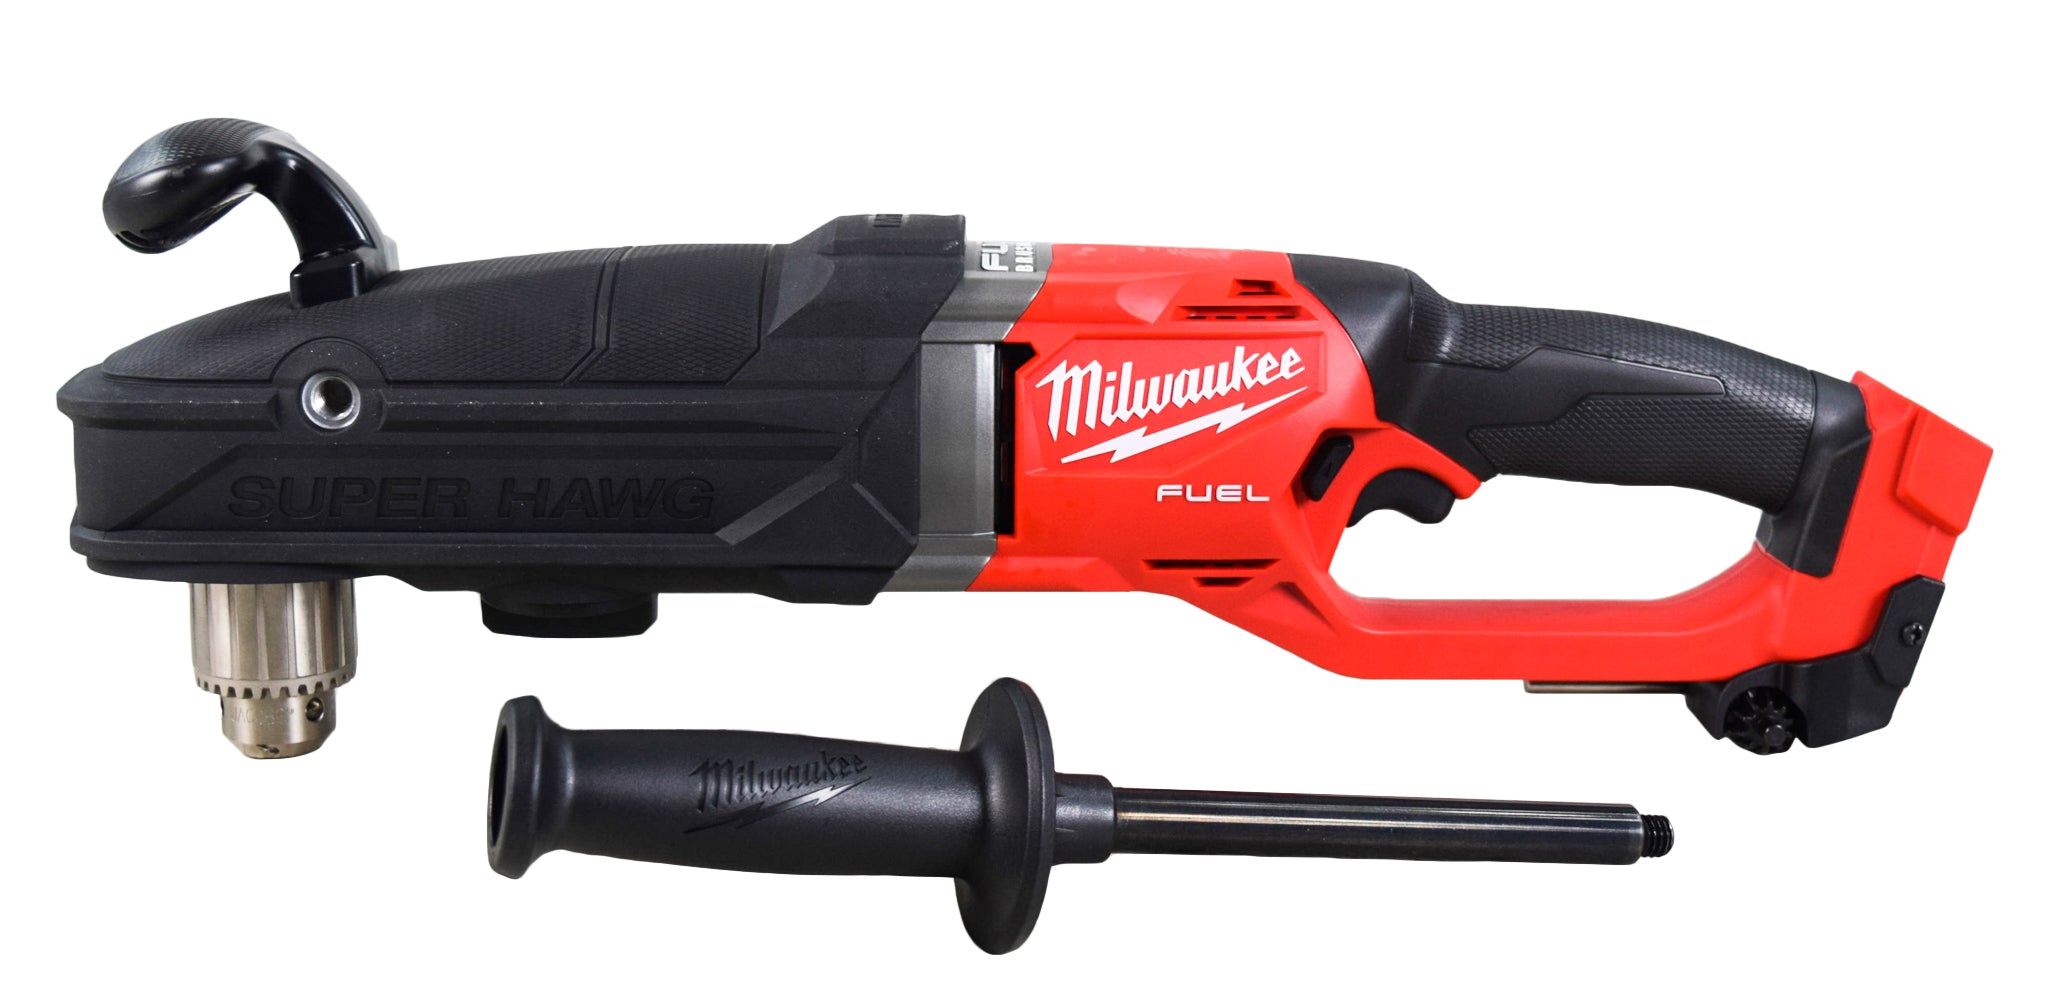 Milwaukee-2809-20-M18-FUEL-18-Volt-Lithium-Ion-Brushless-Cordless-GEN-2-Super-Hawg-1-2-in.-Right-Angle-Drill-Tool-Only-image-1